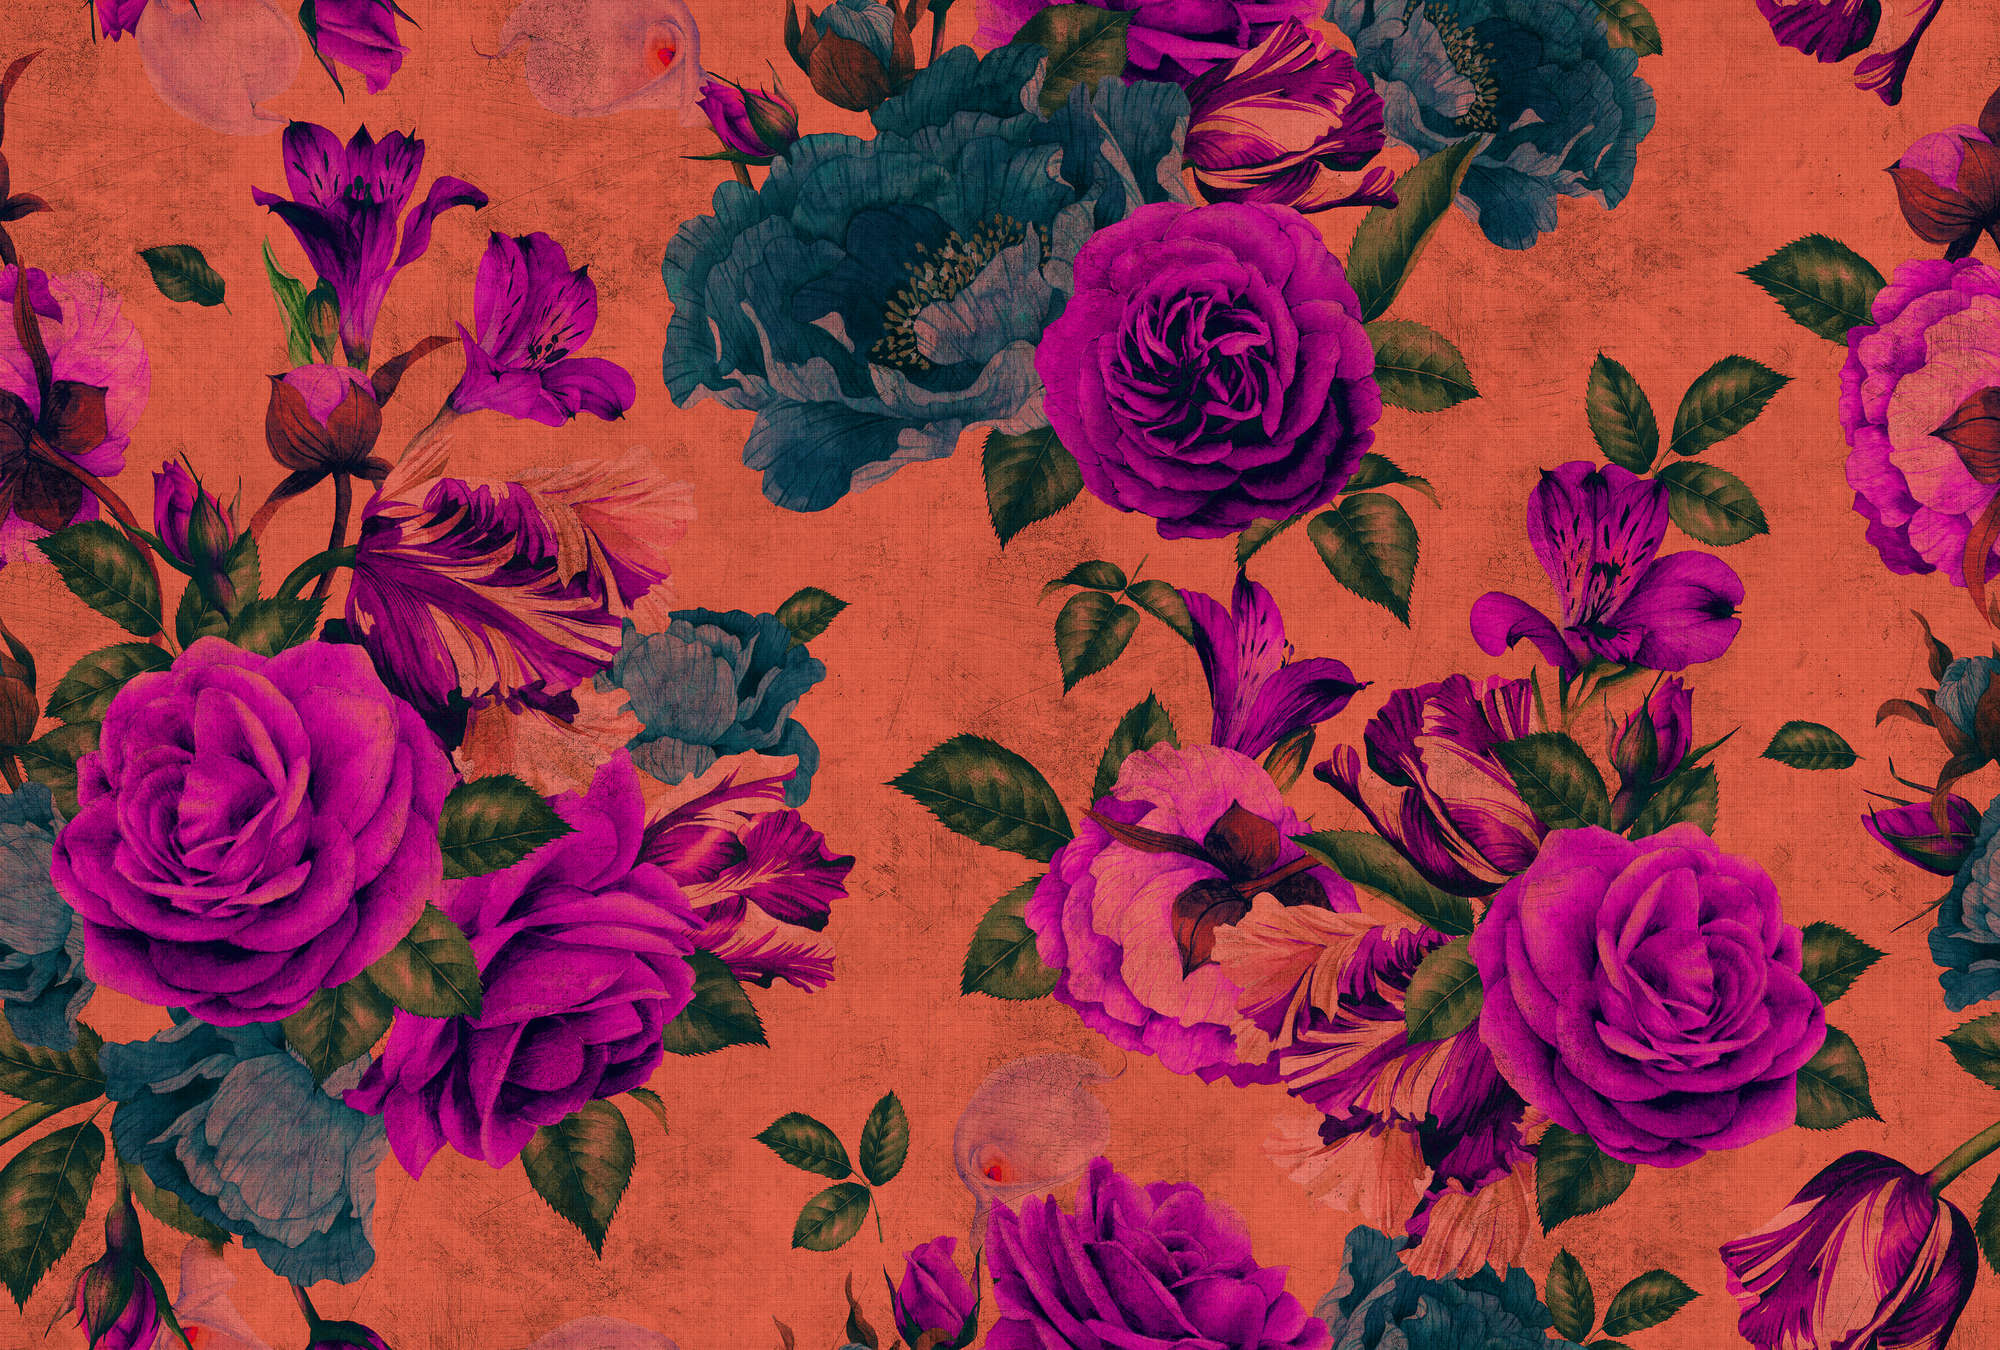             Spanish rose 2 - Rose blossom wallpaper, natural structure with bright colours - Orange, Violet | Premium smooth fleece
        